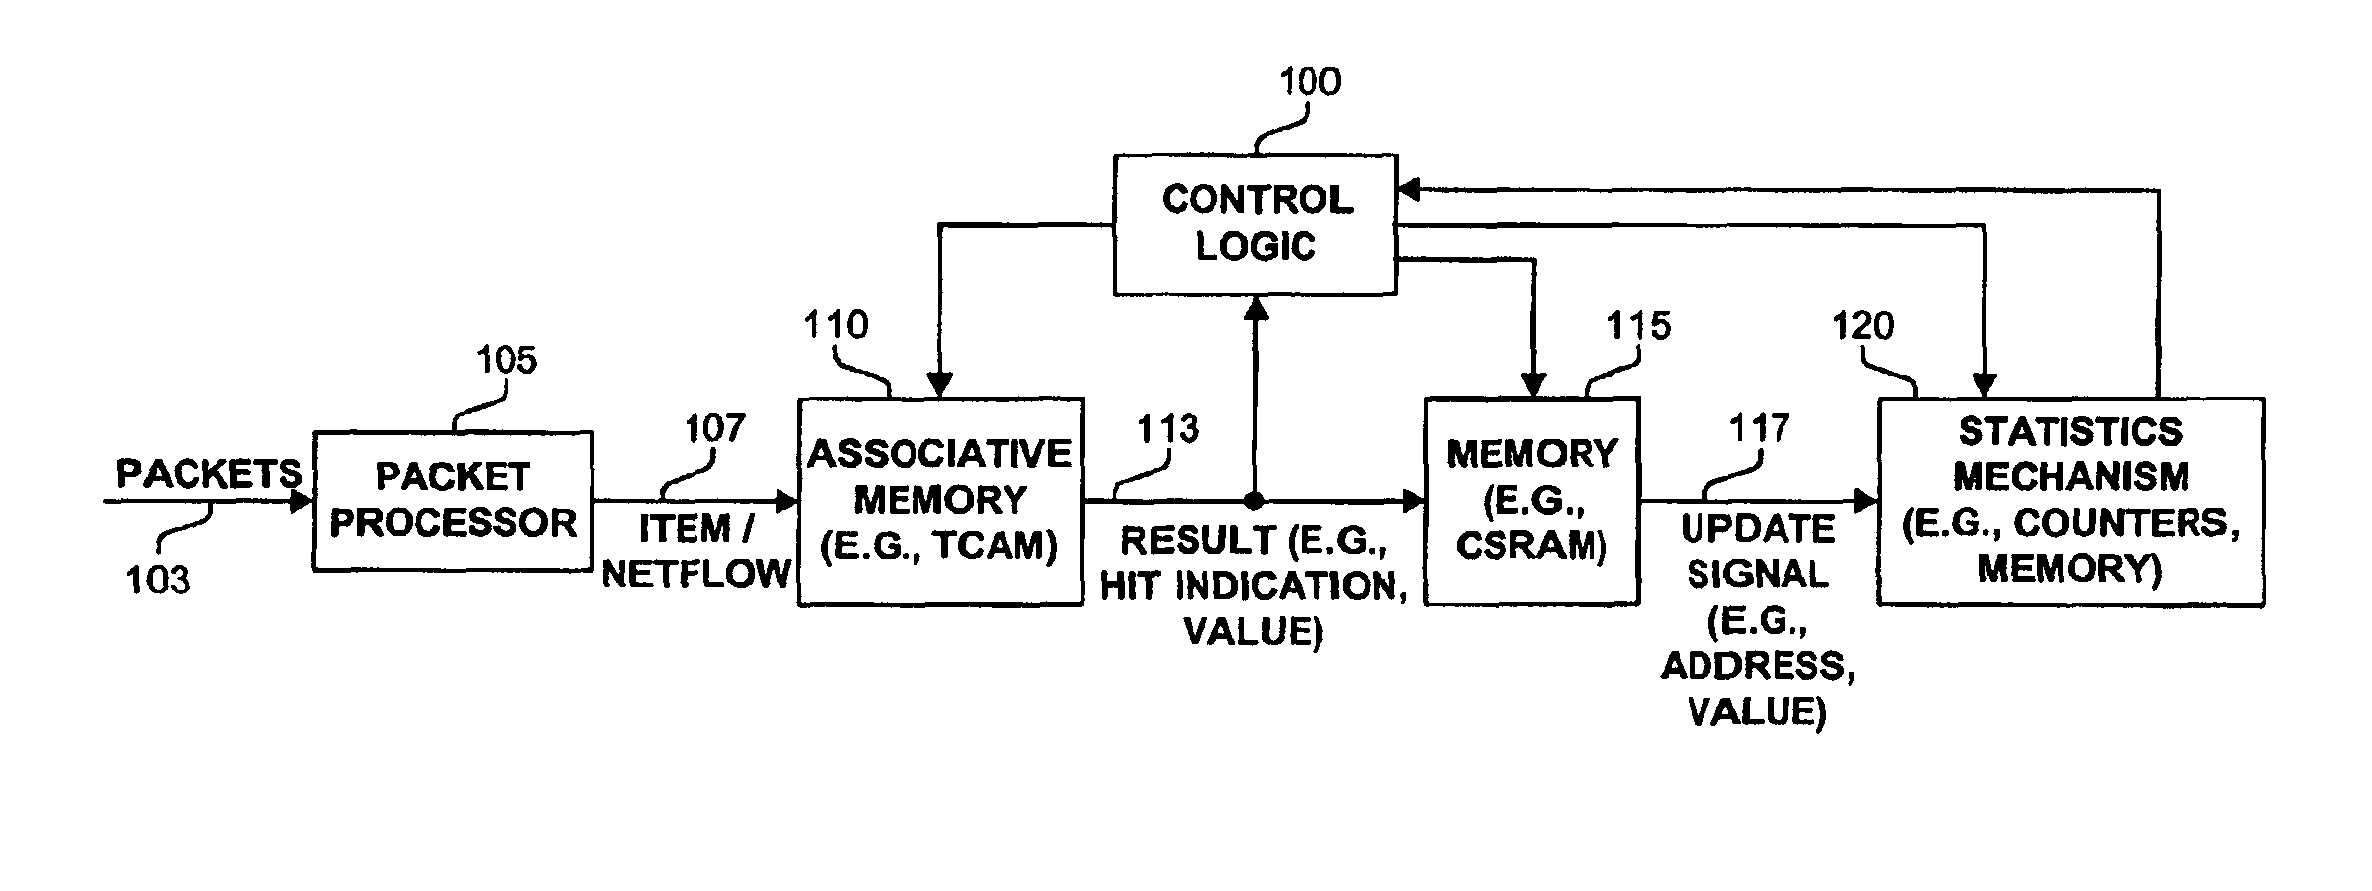 Method and apparatus for maintaining netflow statistics using an associative memory to identify and maintain netflows